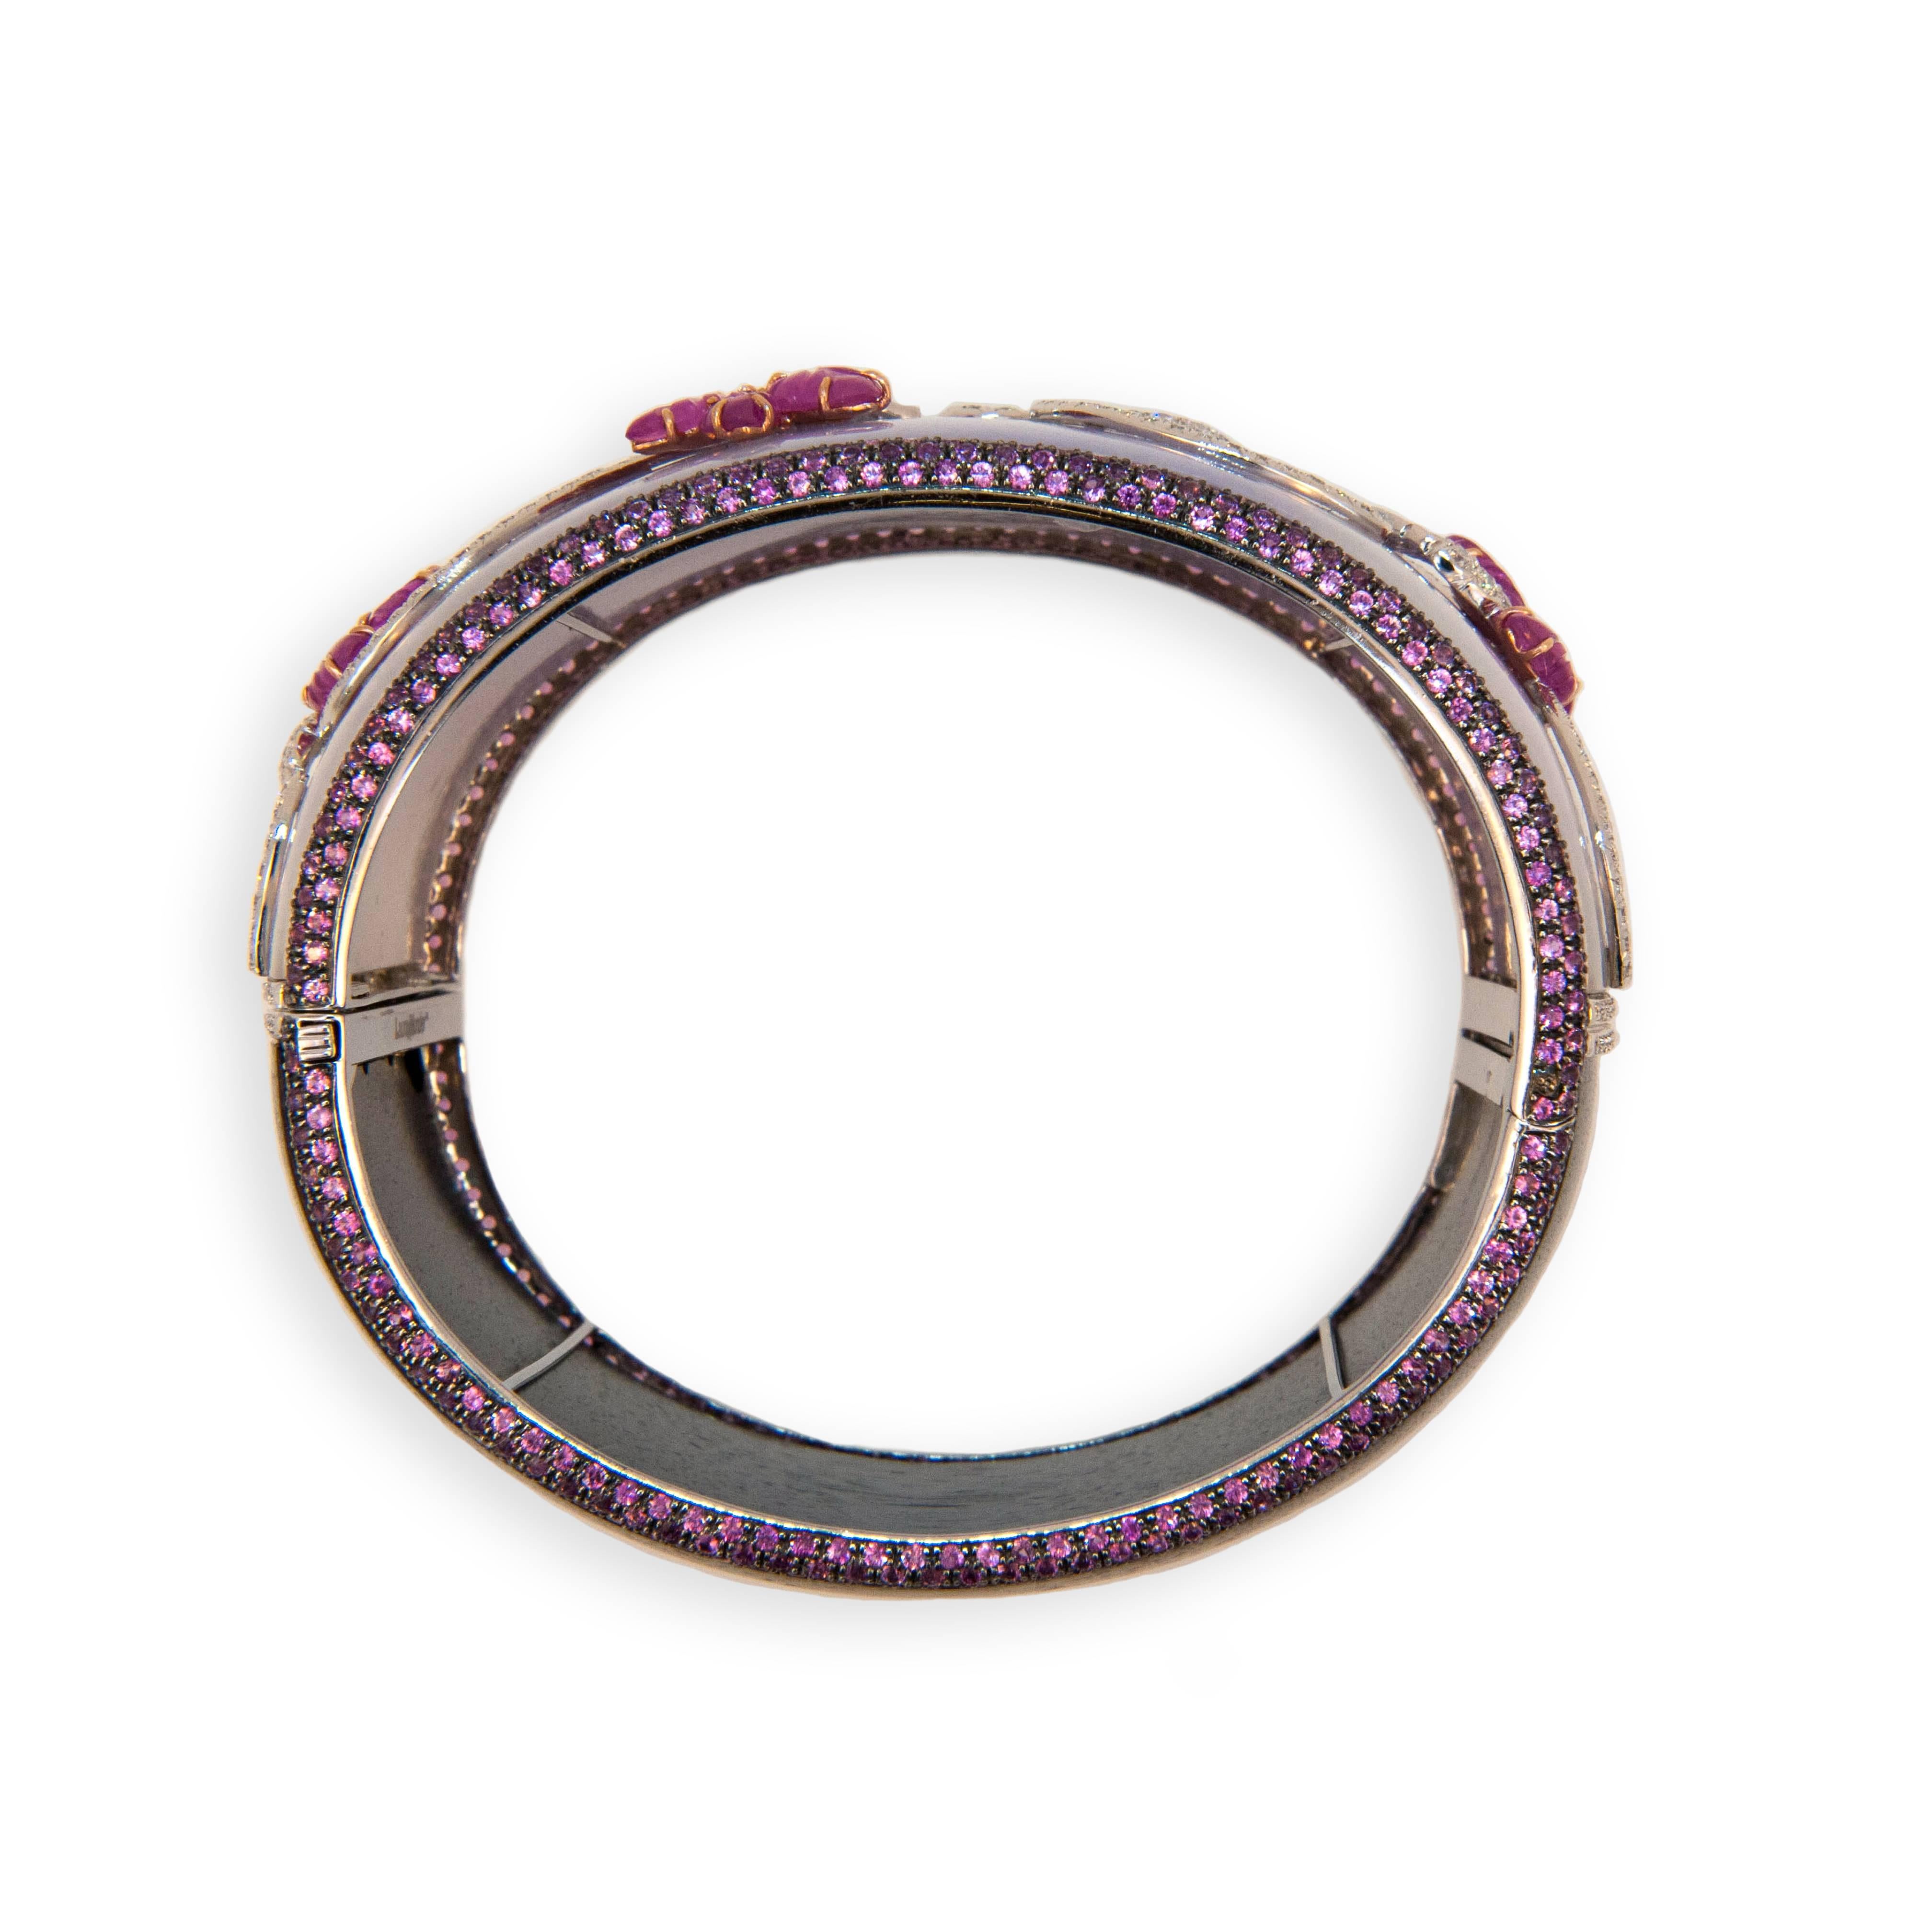 18 karat rose and white gold and blackened white gold hinged bangle bracelet, half Lavender Jade, half Grenadill wood 1.5 inches wide with pave pink sapphire edge 598 pink sapphires 8.77 carats total weight. Lavender Jade is set with 10 carved Ruby